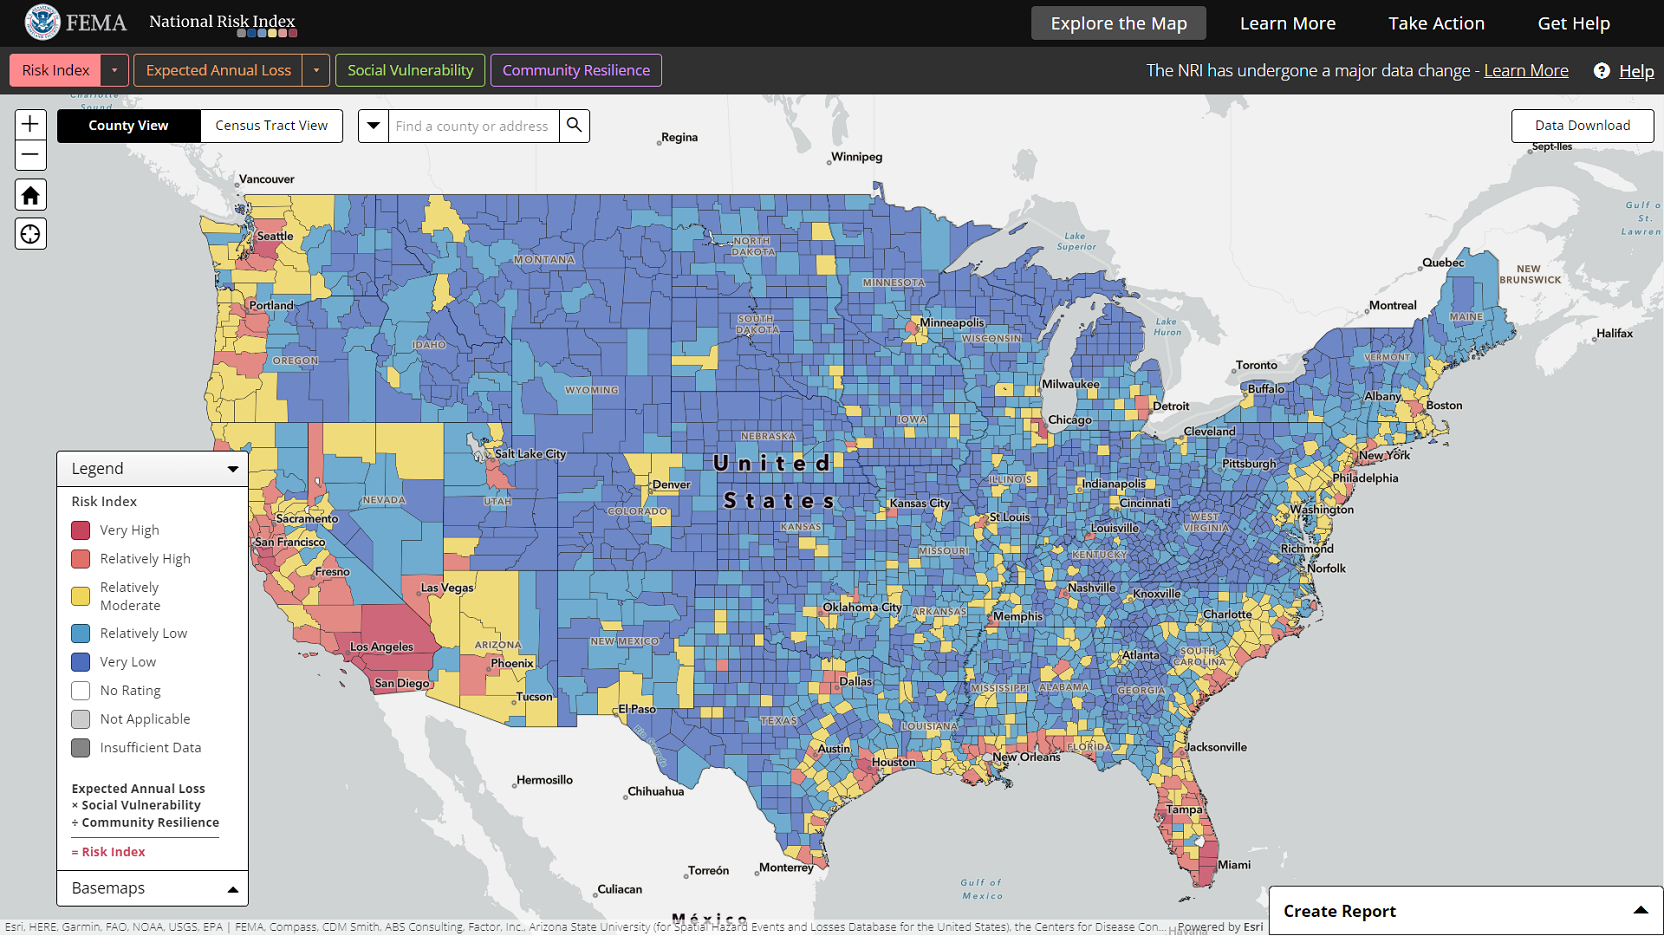 The National Risk Index Map showing the conterminous United States with the composite Risk Index layer for all hazard types.